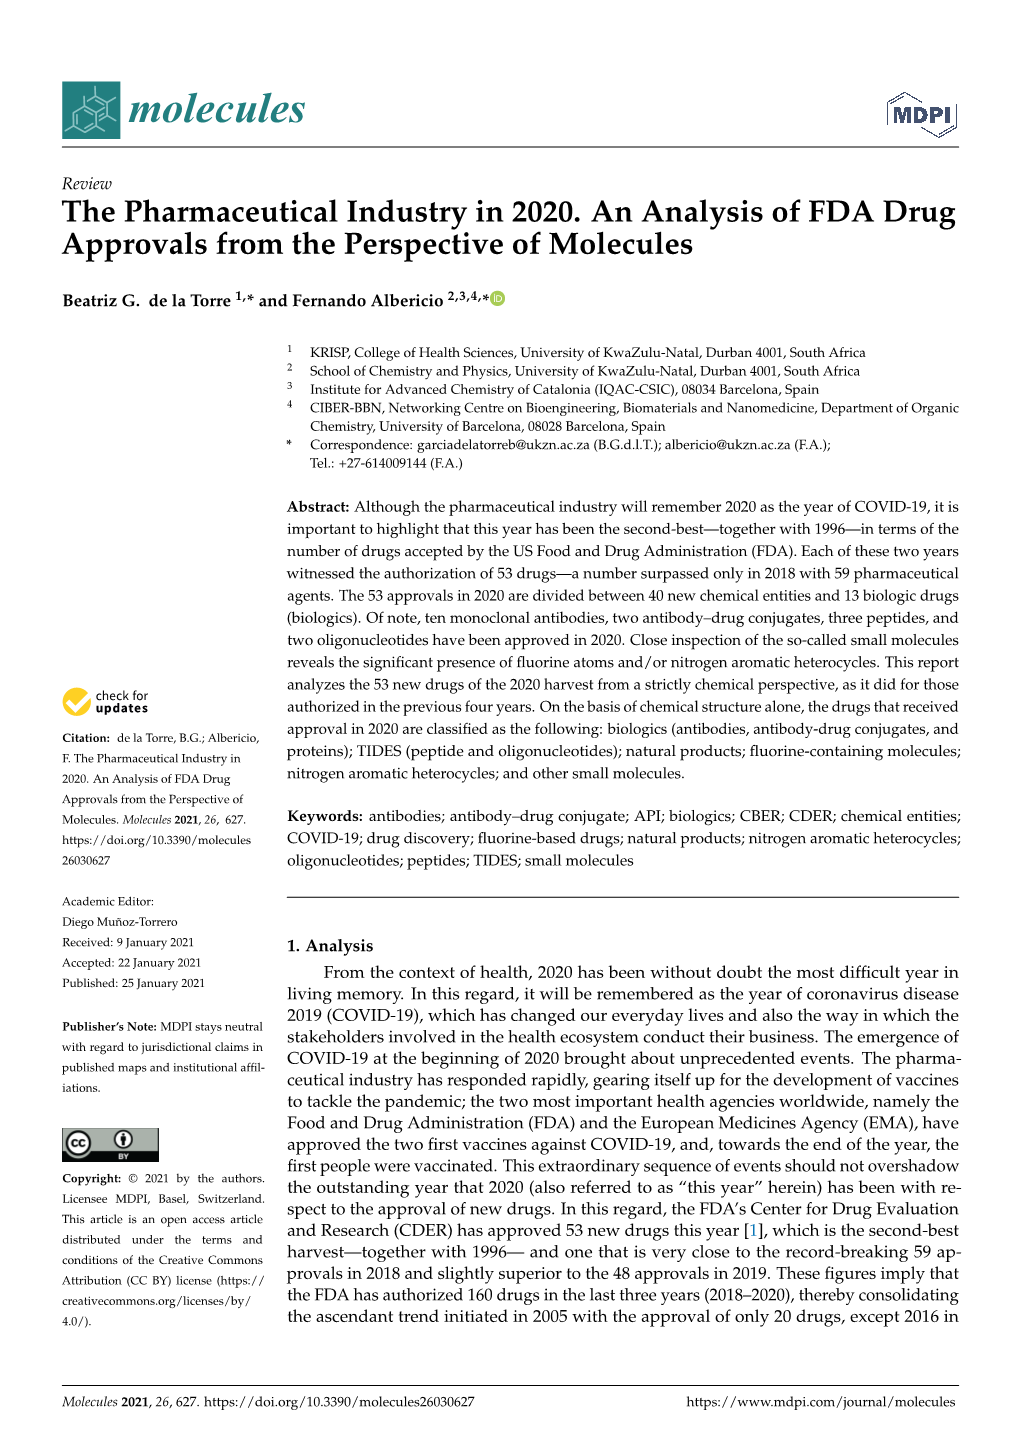 The Pharmaceutical Industry in 2020. an Analysis of FDA Drug Approvals from the Perspective of Molecules